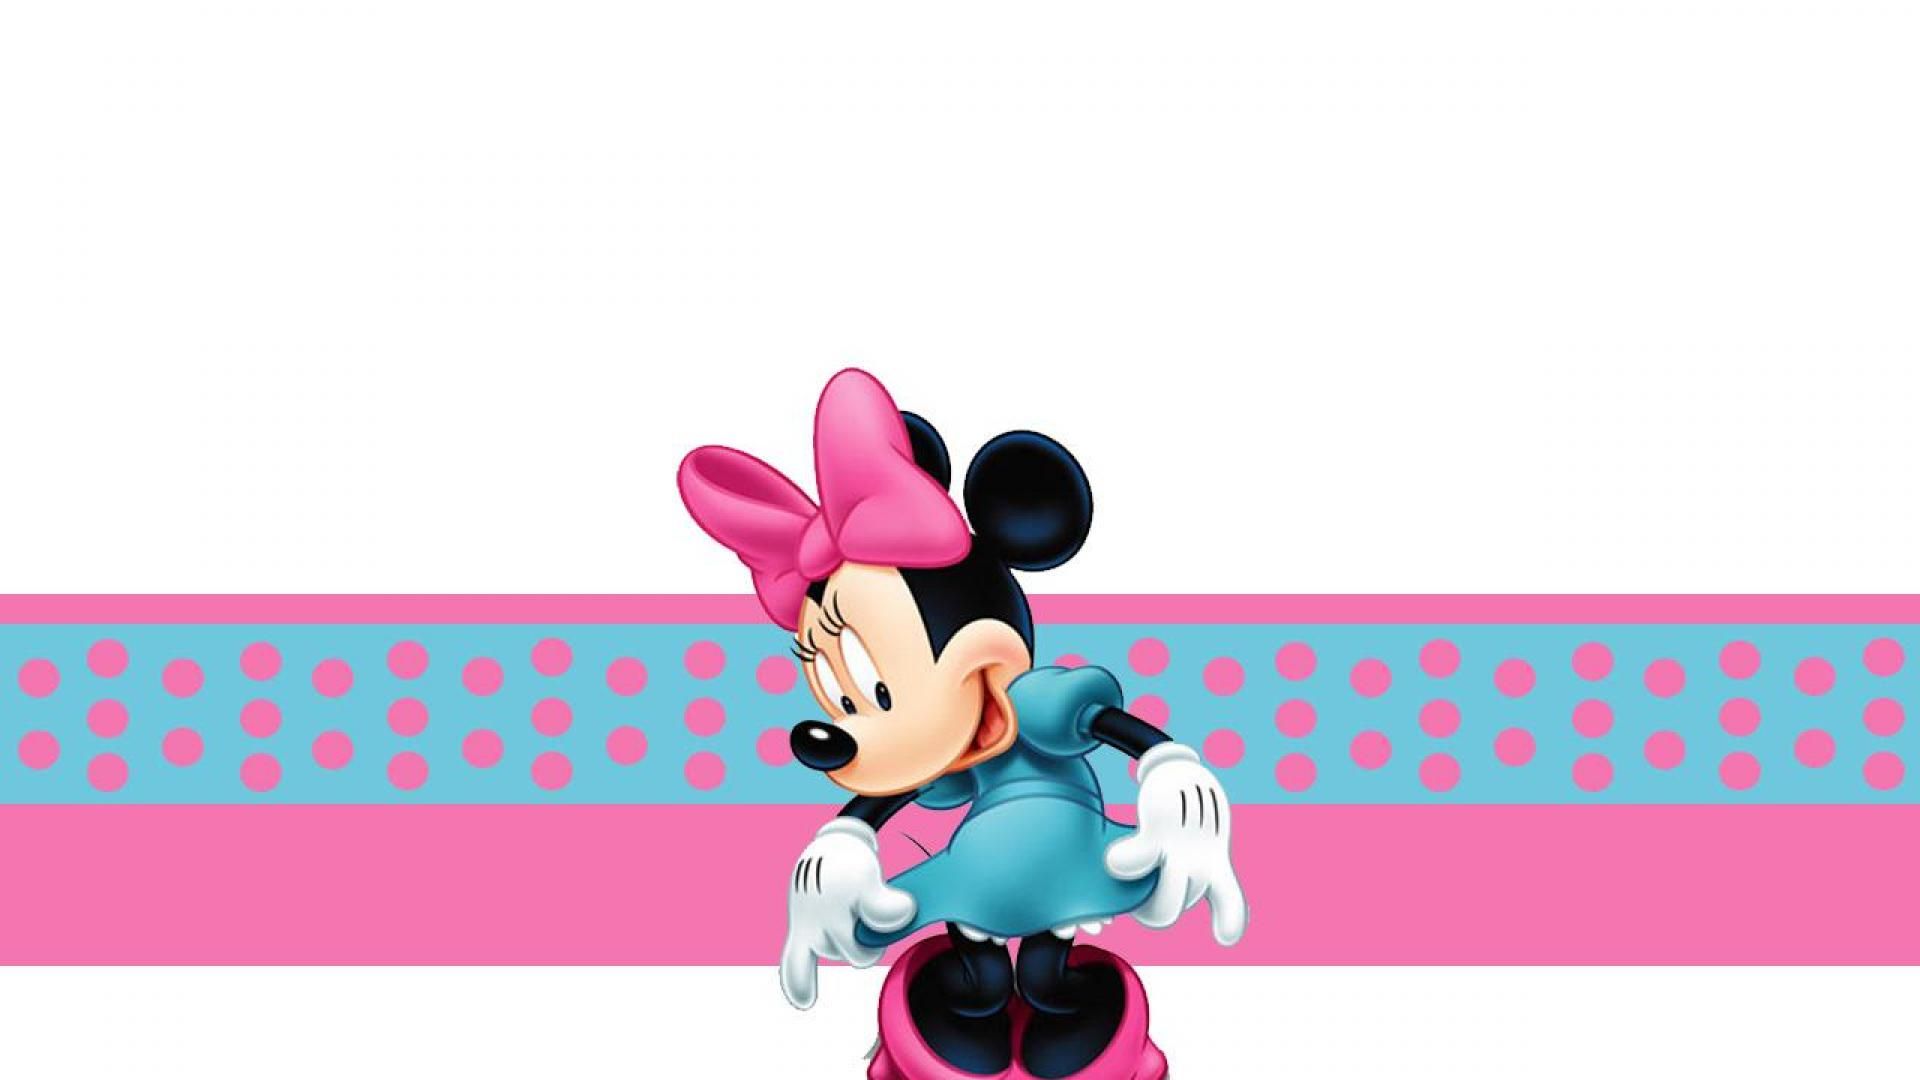 Minnie mouse - - High Quality and Resolution Wallpapers